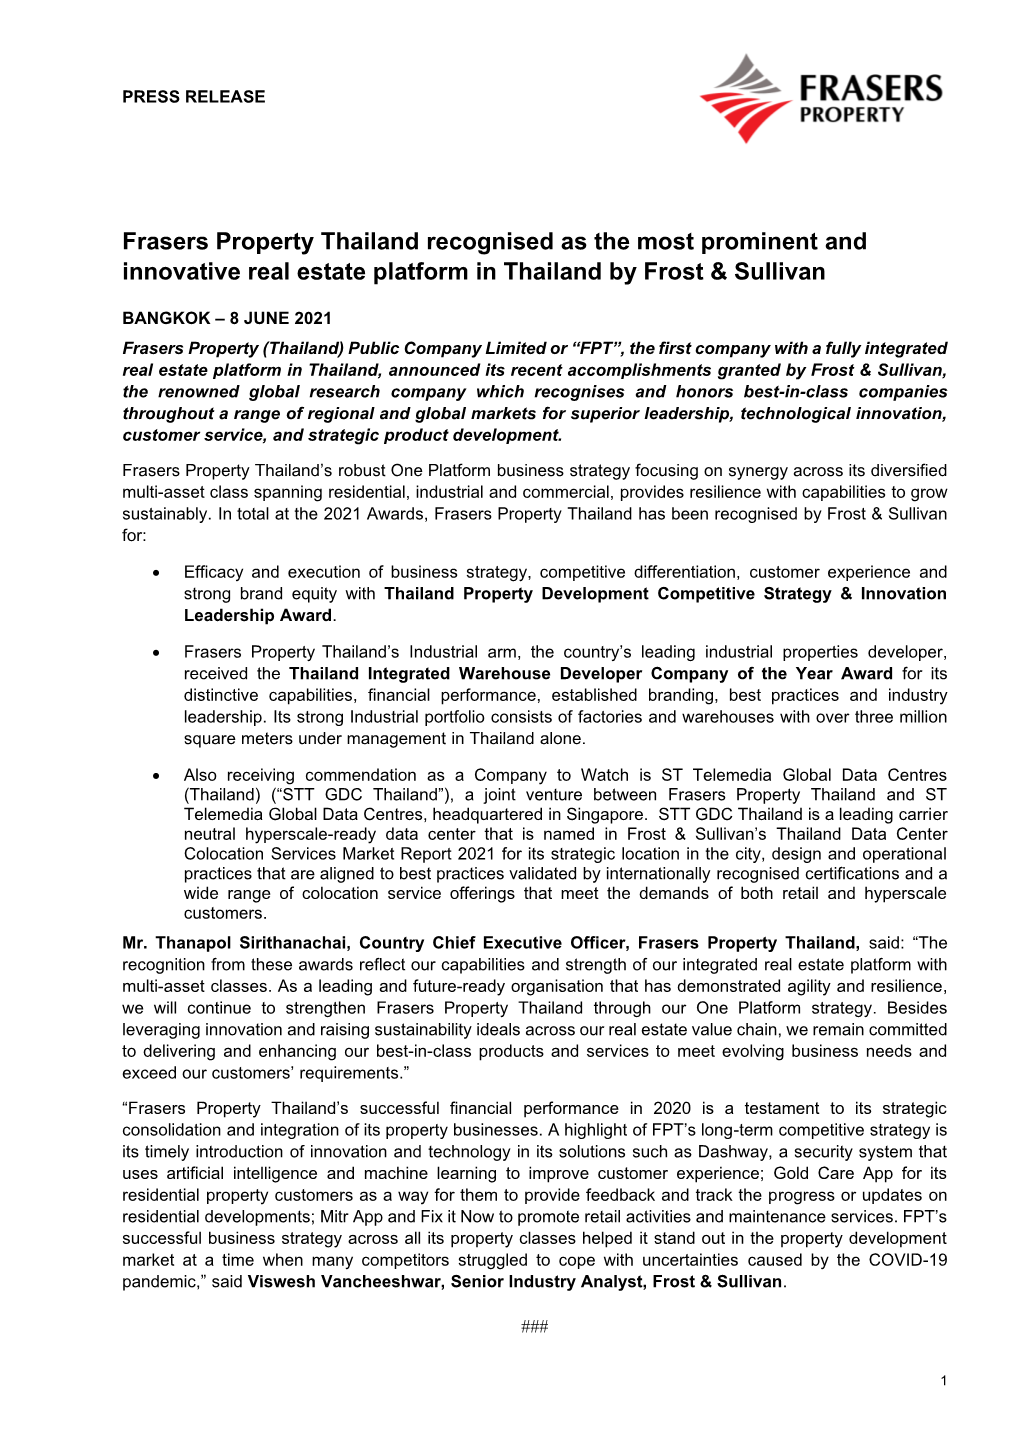 Frasers Property Thailand Recognised As the Most Prominent and Innovative Real Estate Platform in Thailand by Frost & Sullivan